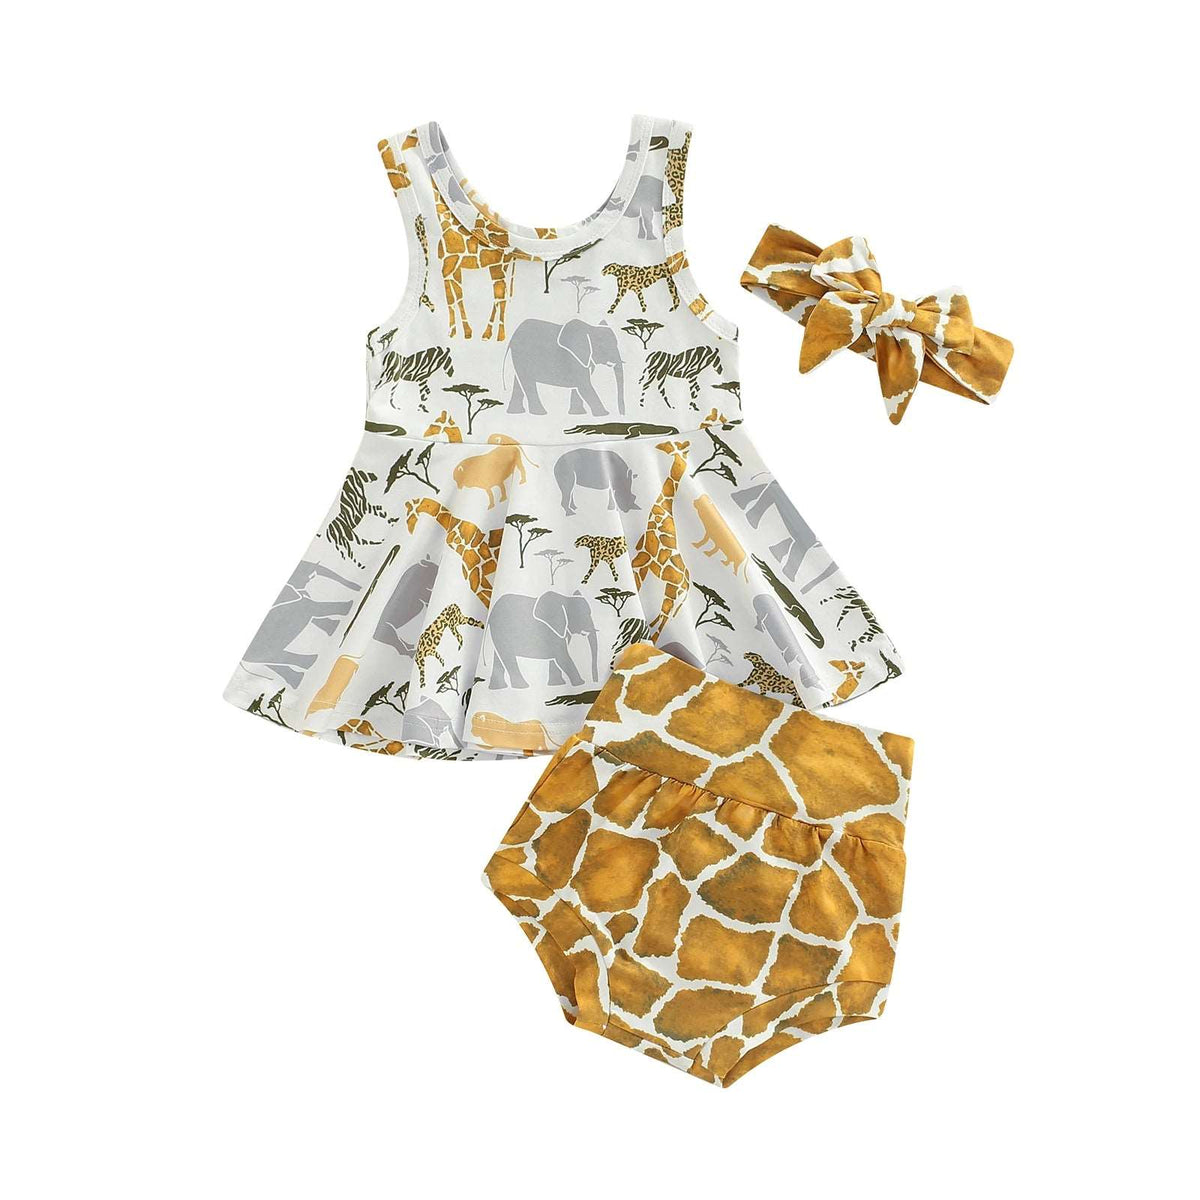 Baby Girls Summer Outfits - For all baby